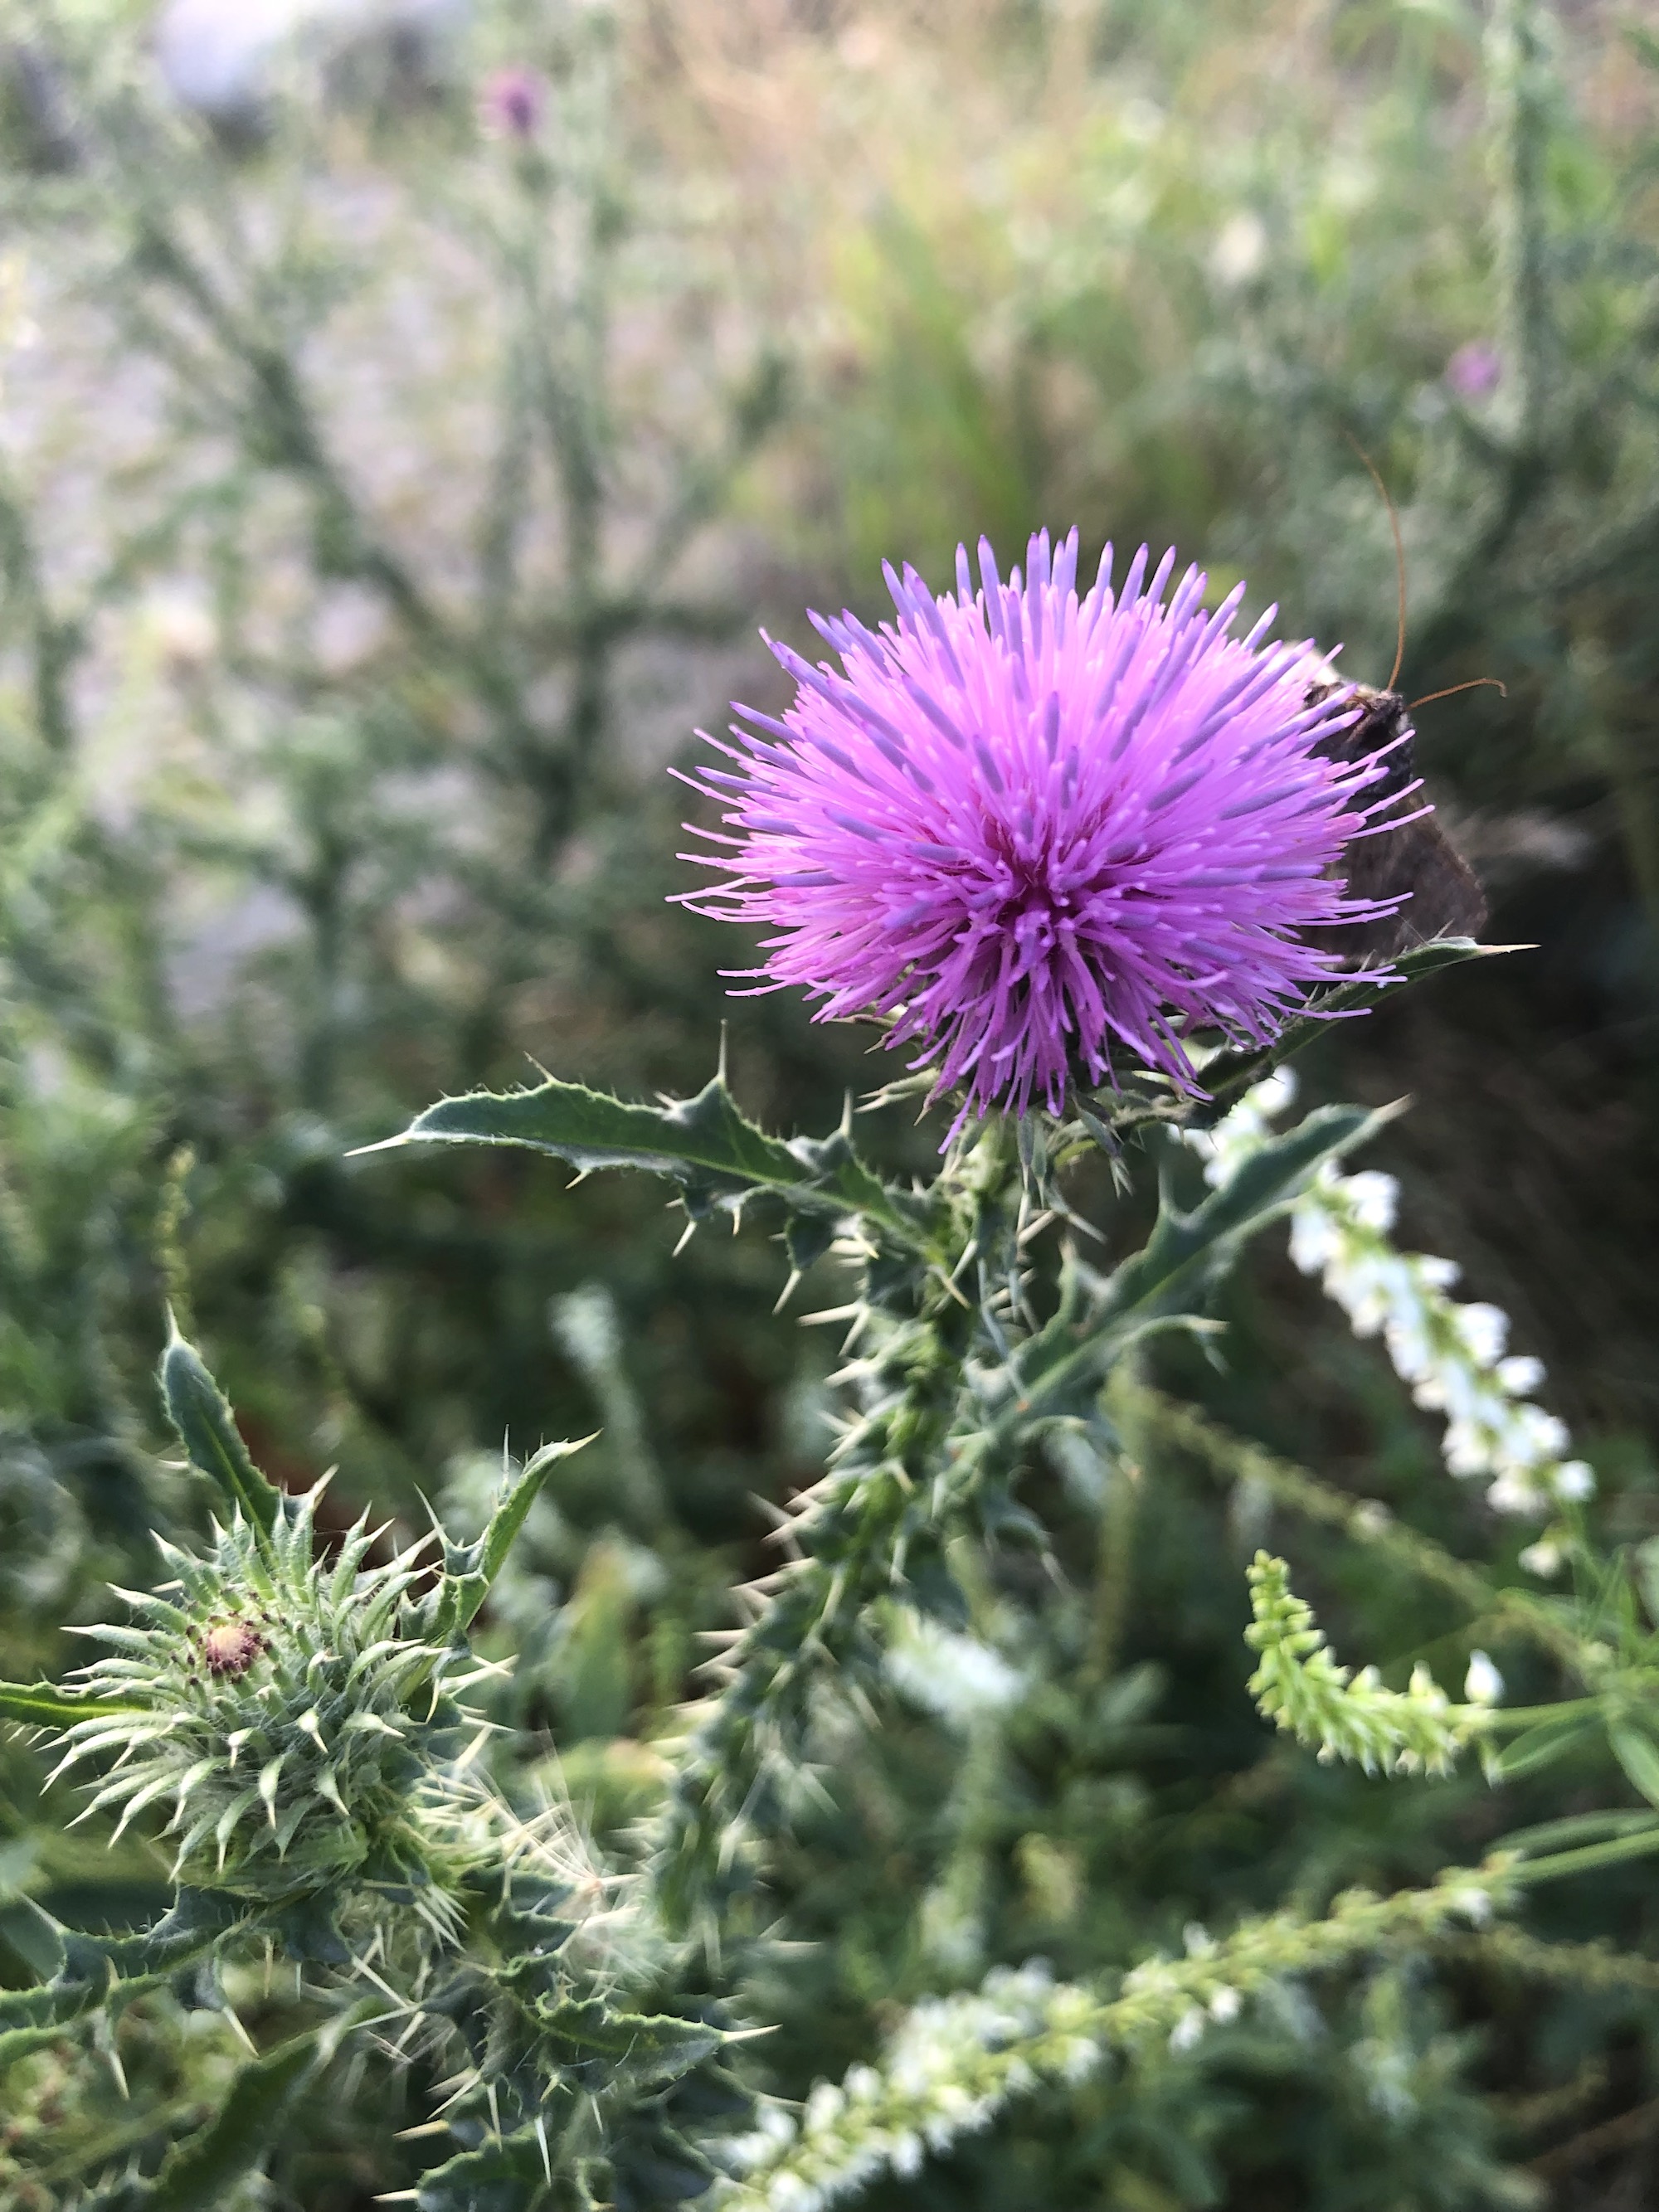 Plumeless Thistle in Wingra Park on shore of Lake Wingra in Madison, Wisconsin on July 28, 2019.